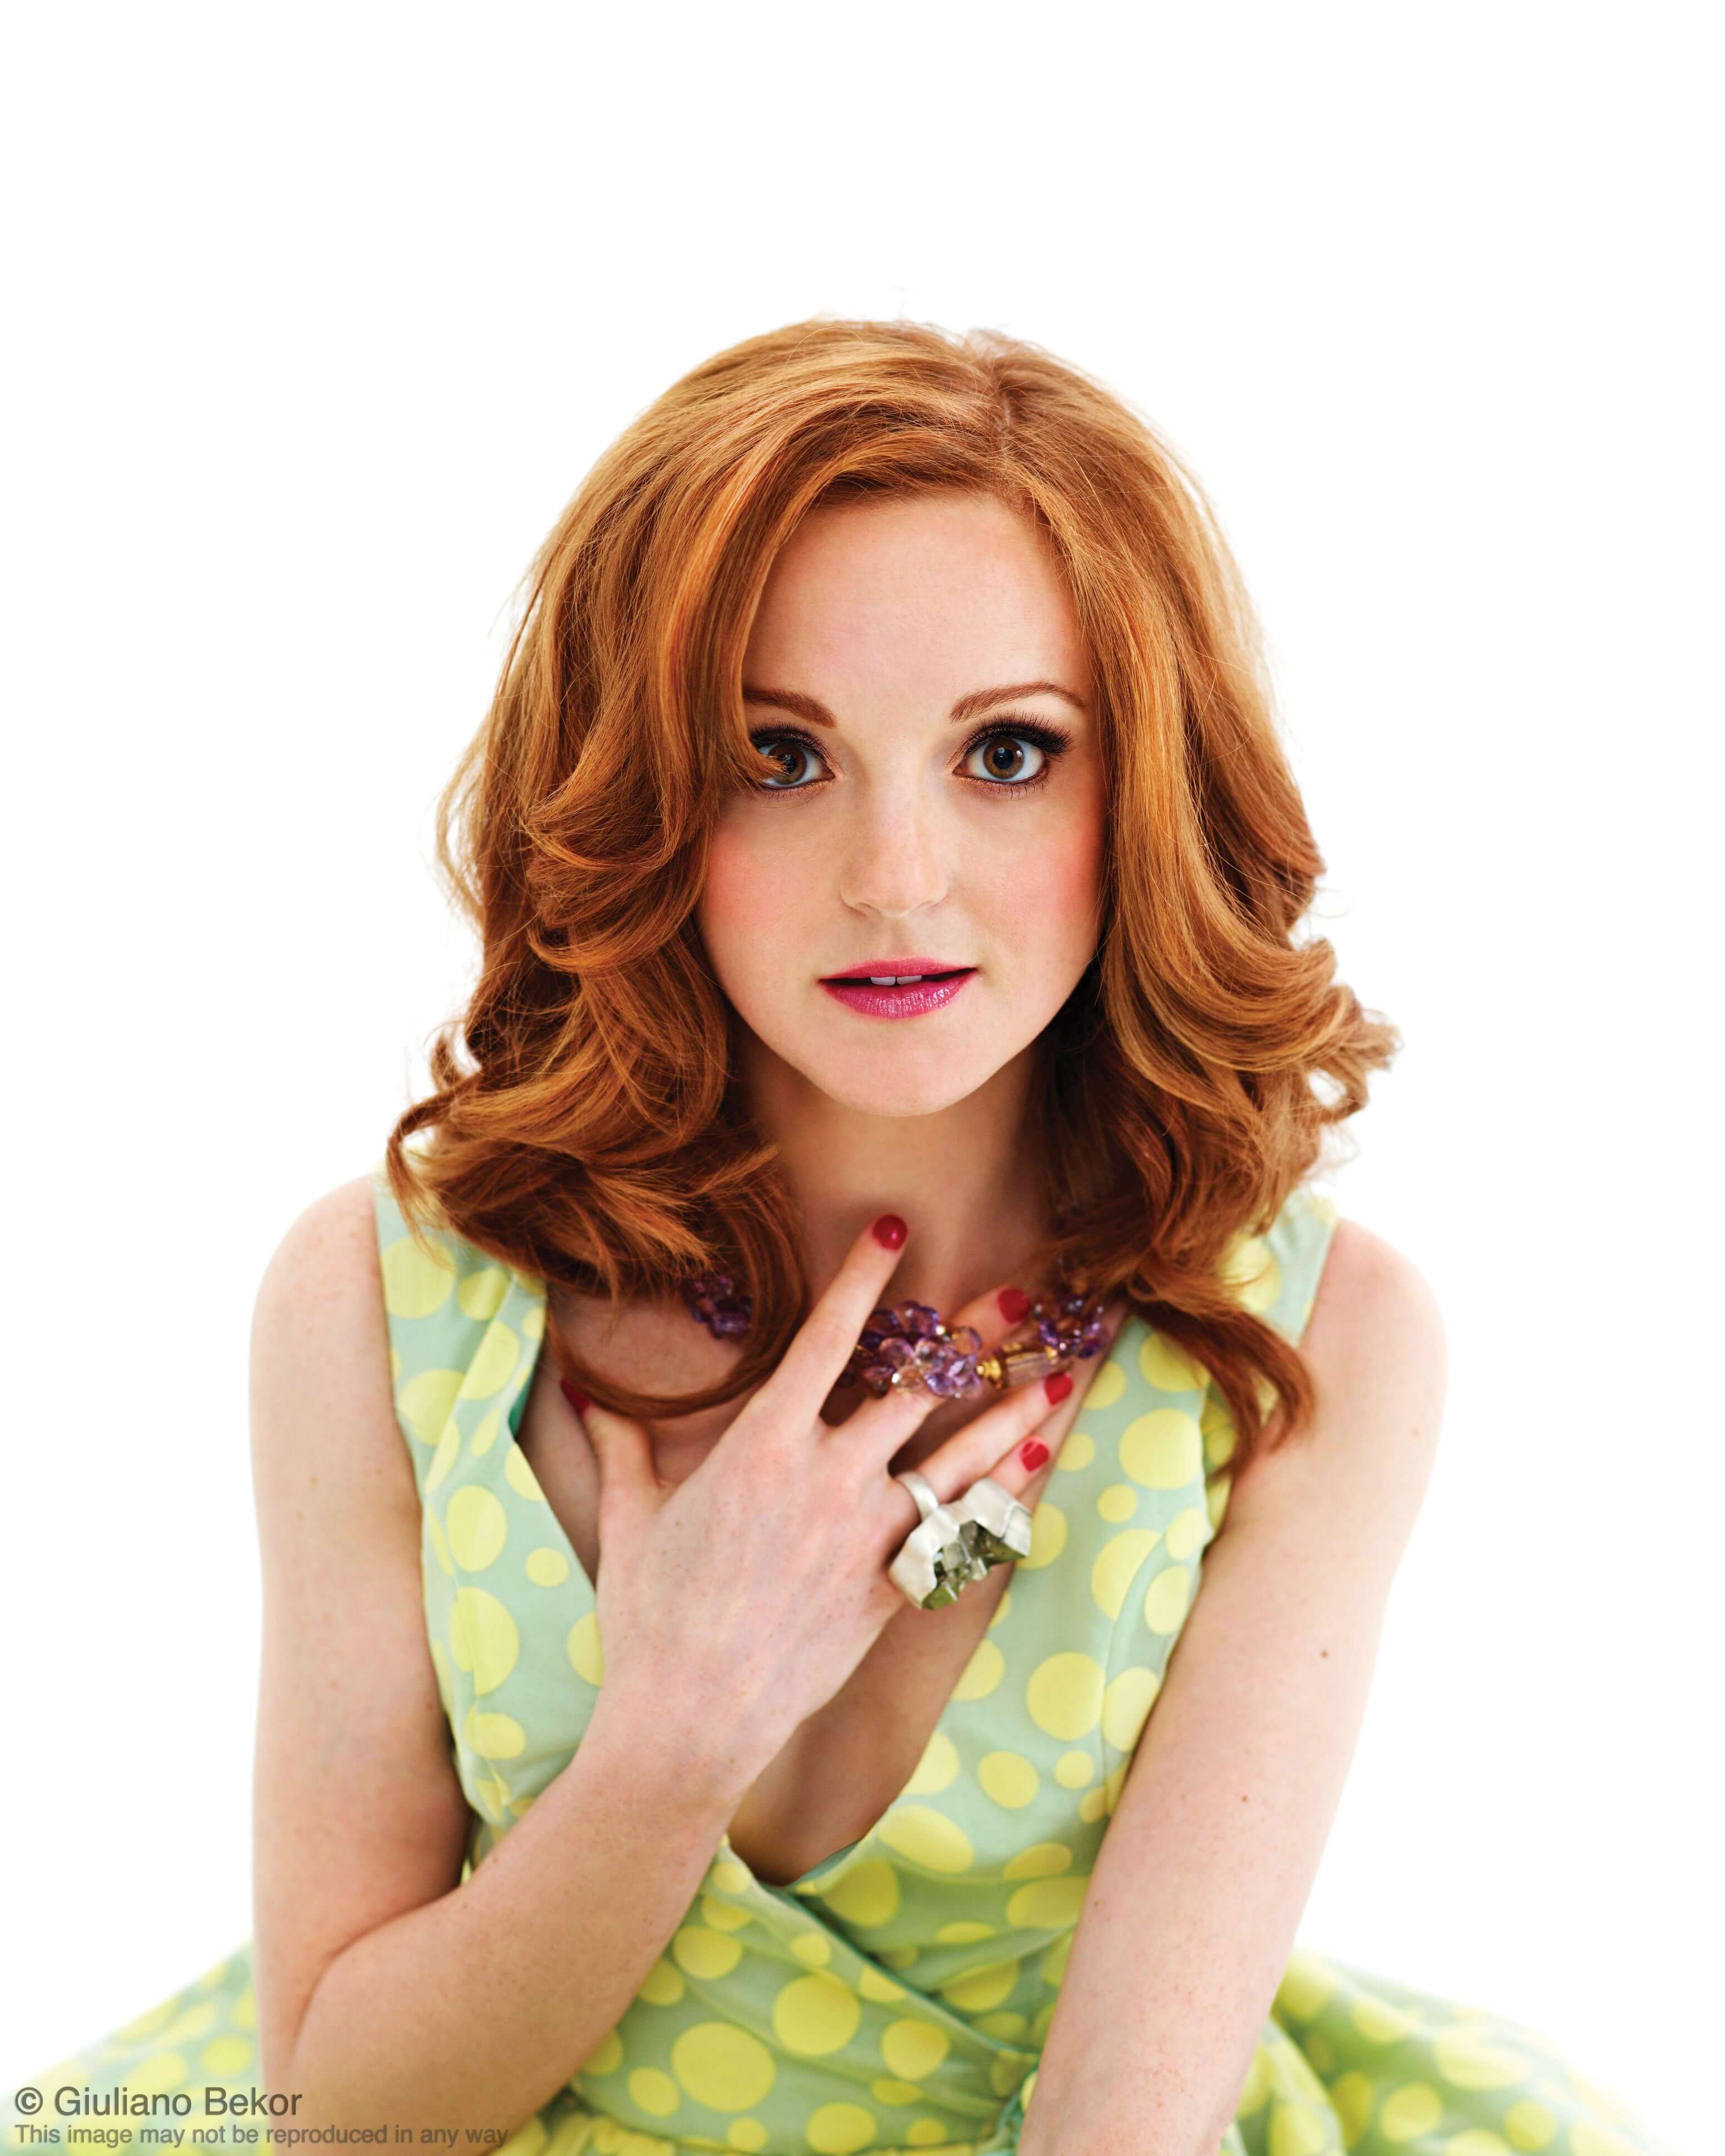 49 Hot Pictures OfJayma Mays Are Going To Cheer You Up | Best Of Comic Books